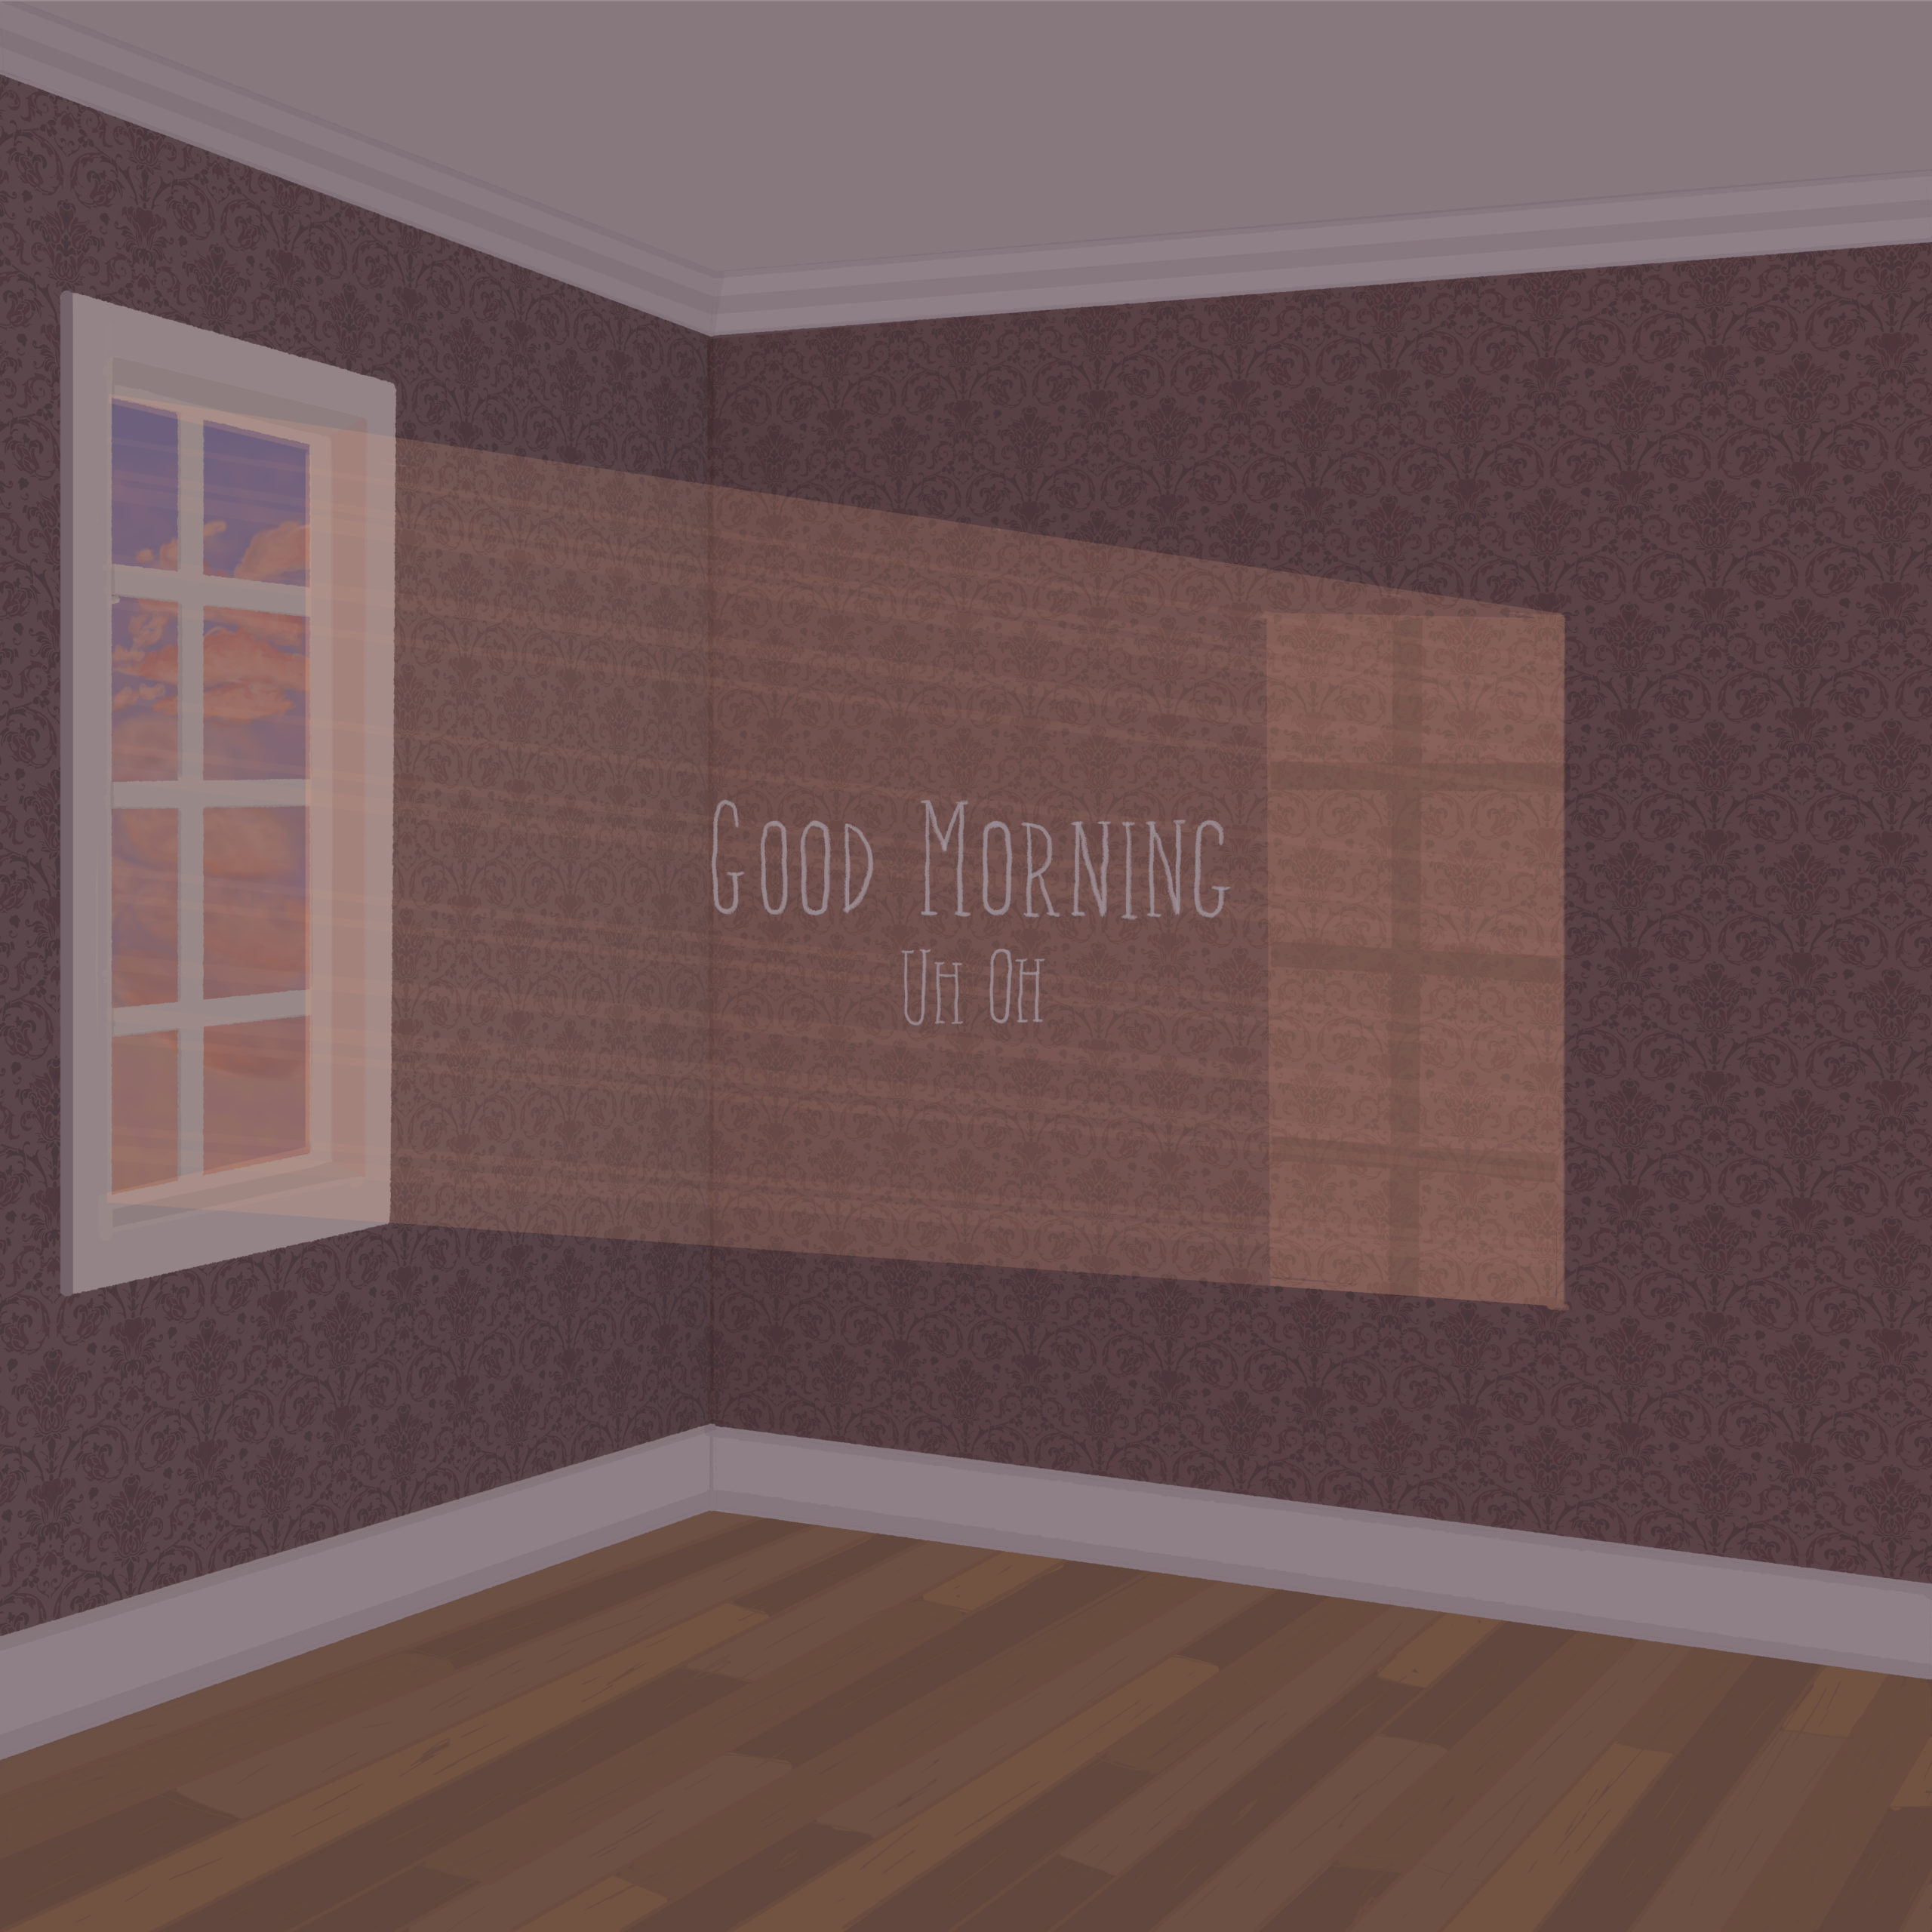 'Good Morning' album art. Features a Digital painting of an empty room with vintage purple wallpaper in the early morning with a sunrise through a window casting a light beam onto the opposite wall.